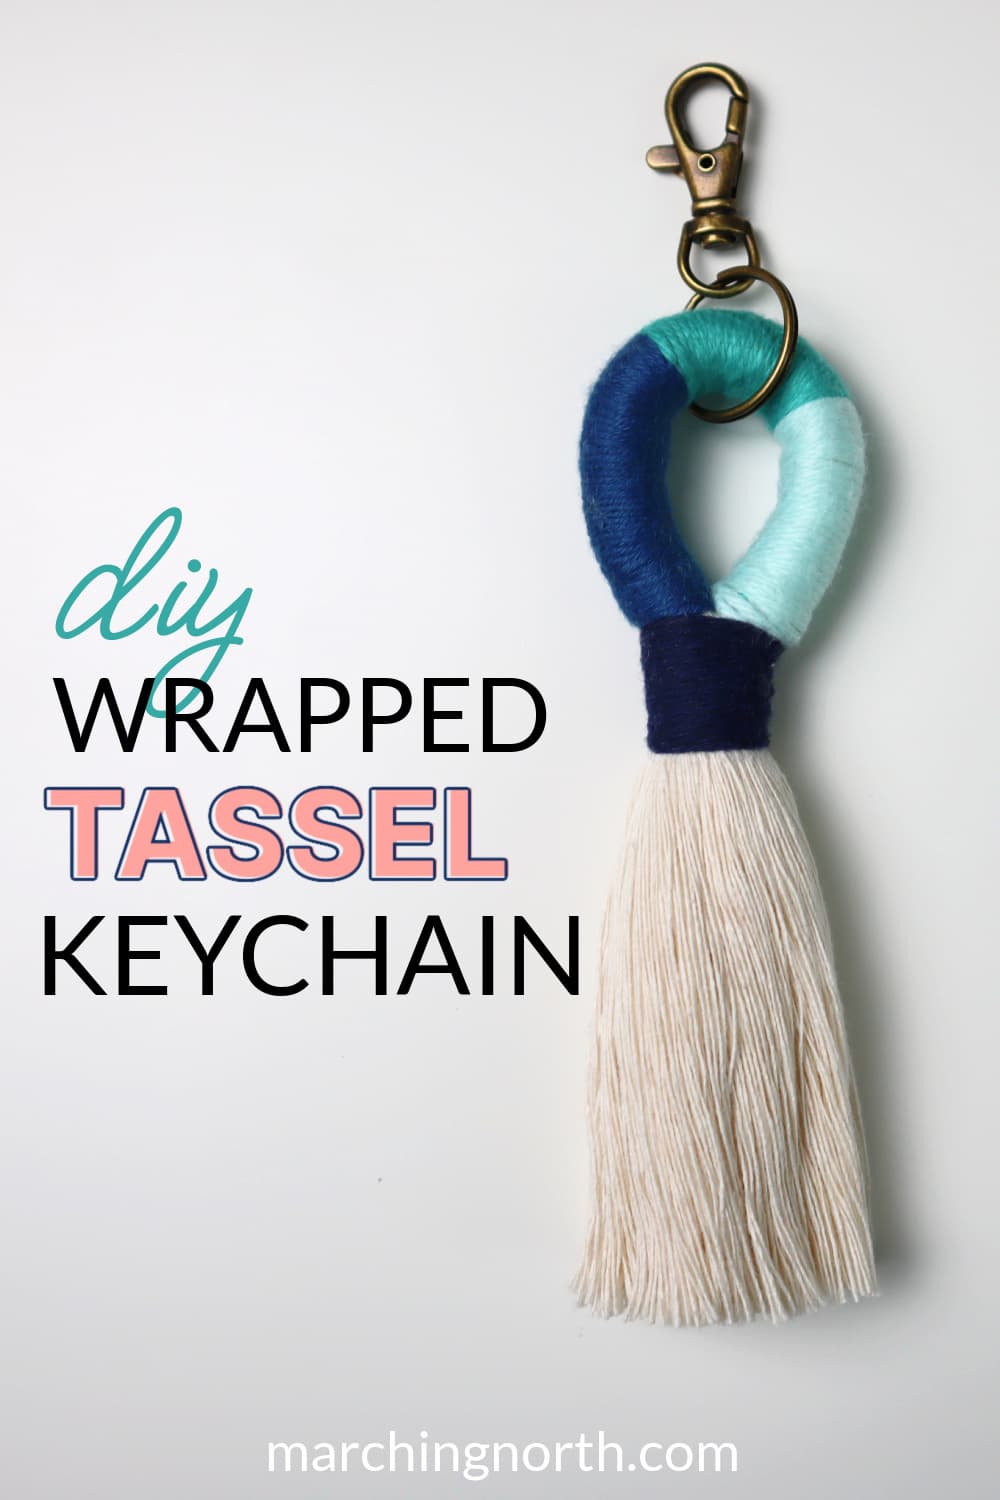 How To Make A Colorful, Fun Rope And Yarn Keychain